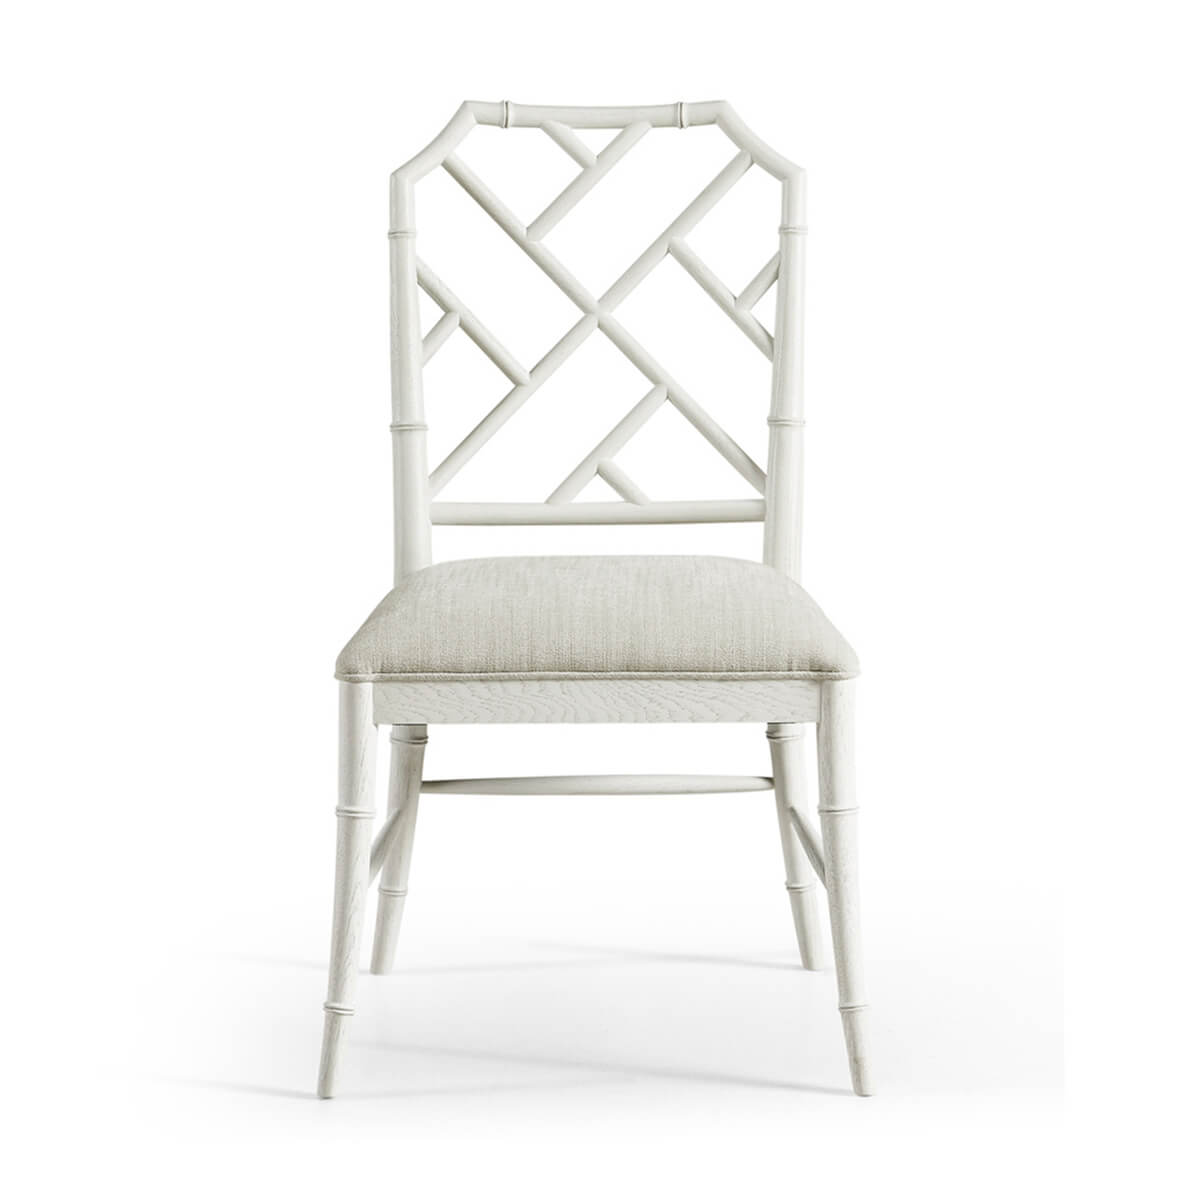 Chippendale Bamboo Dining Chair - White - English Georgian America